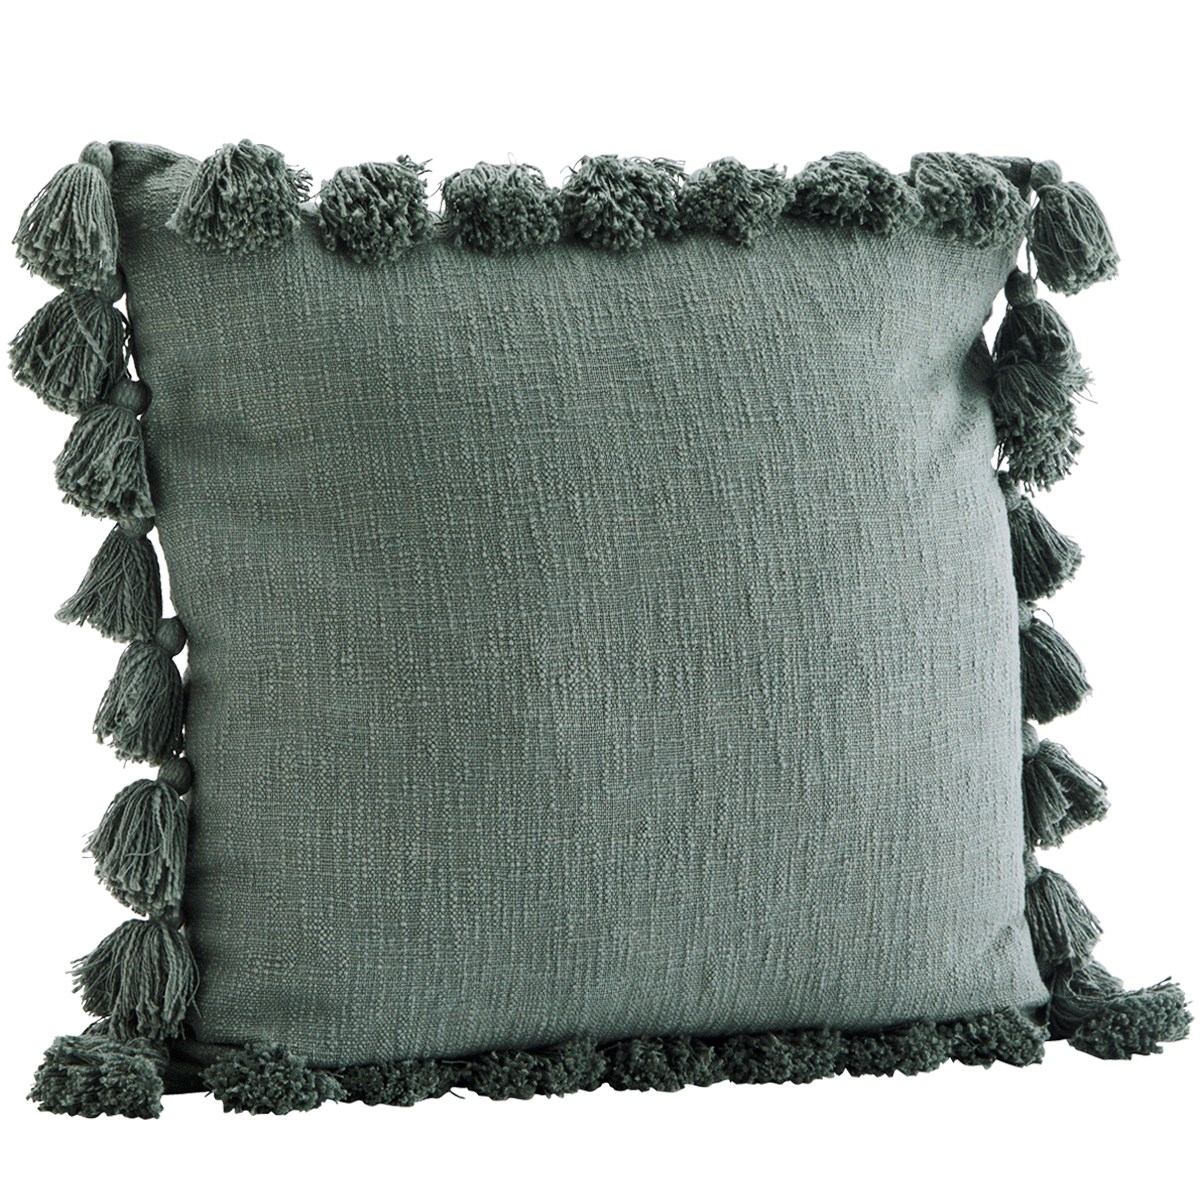 Cushion cover with tassels 60x60 cm, Emerald